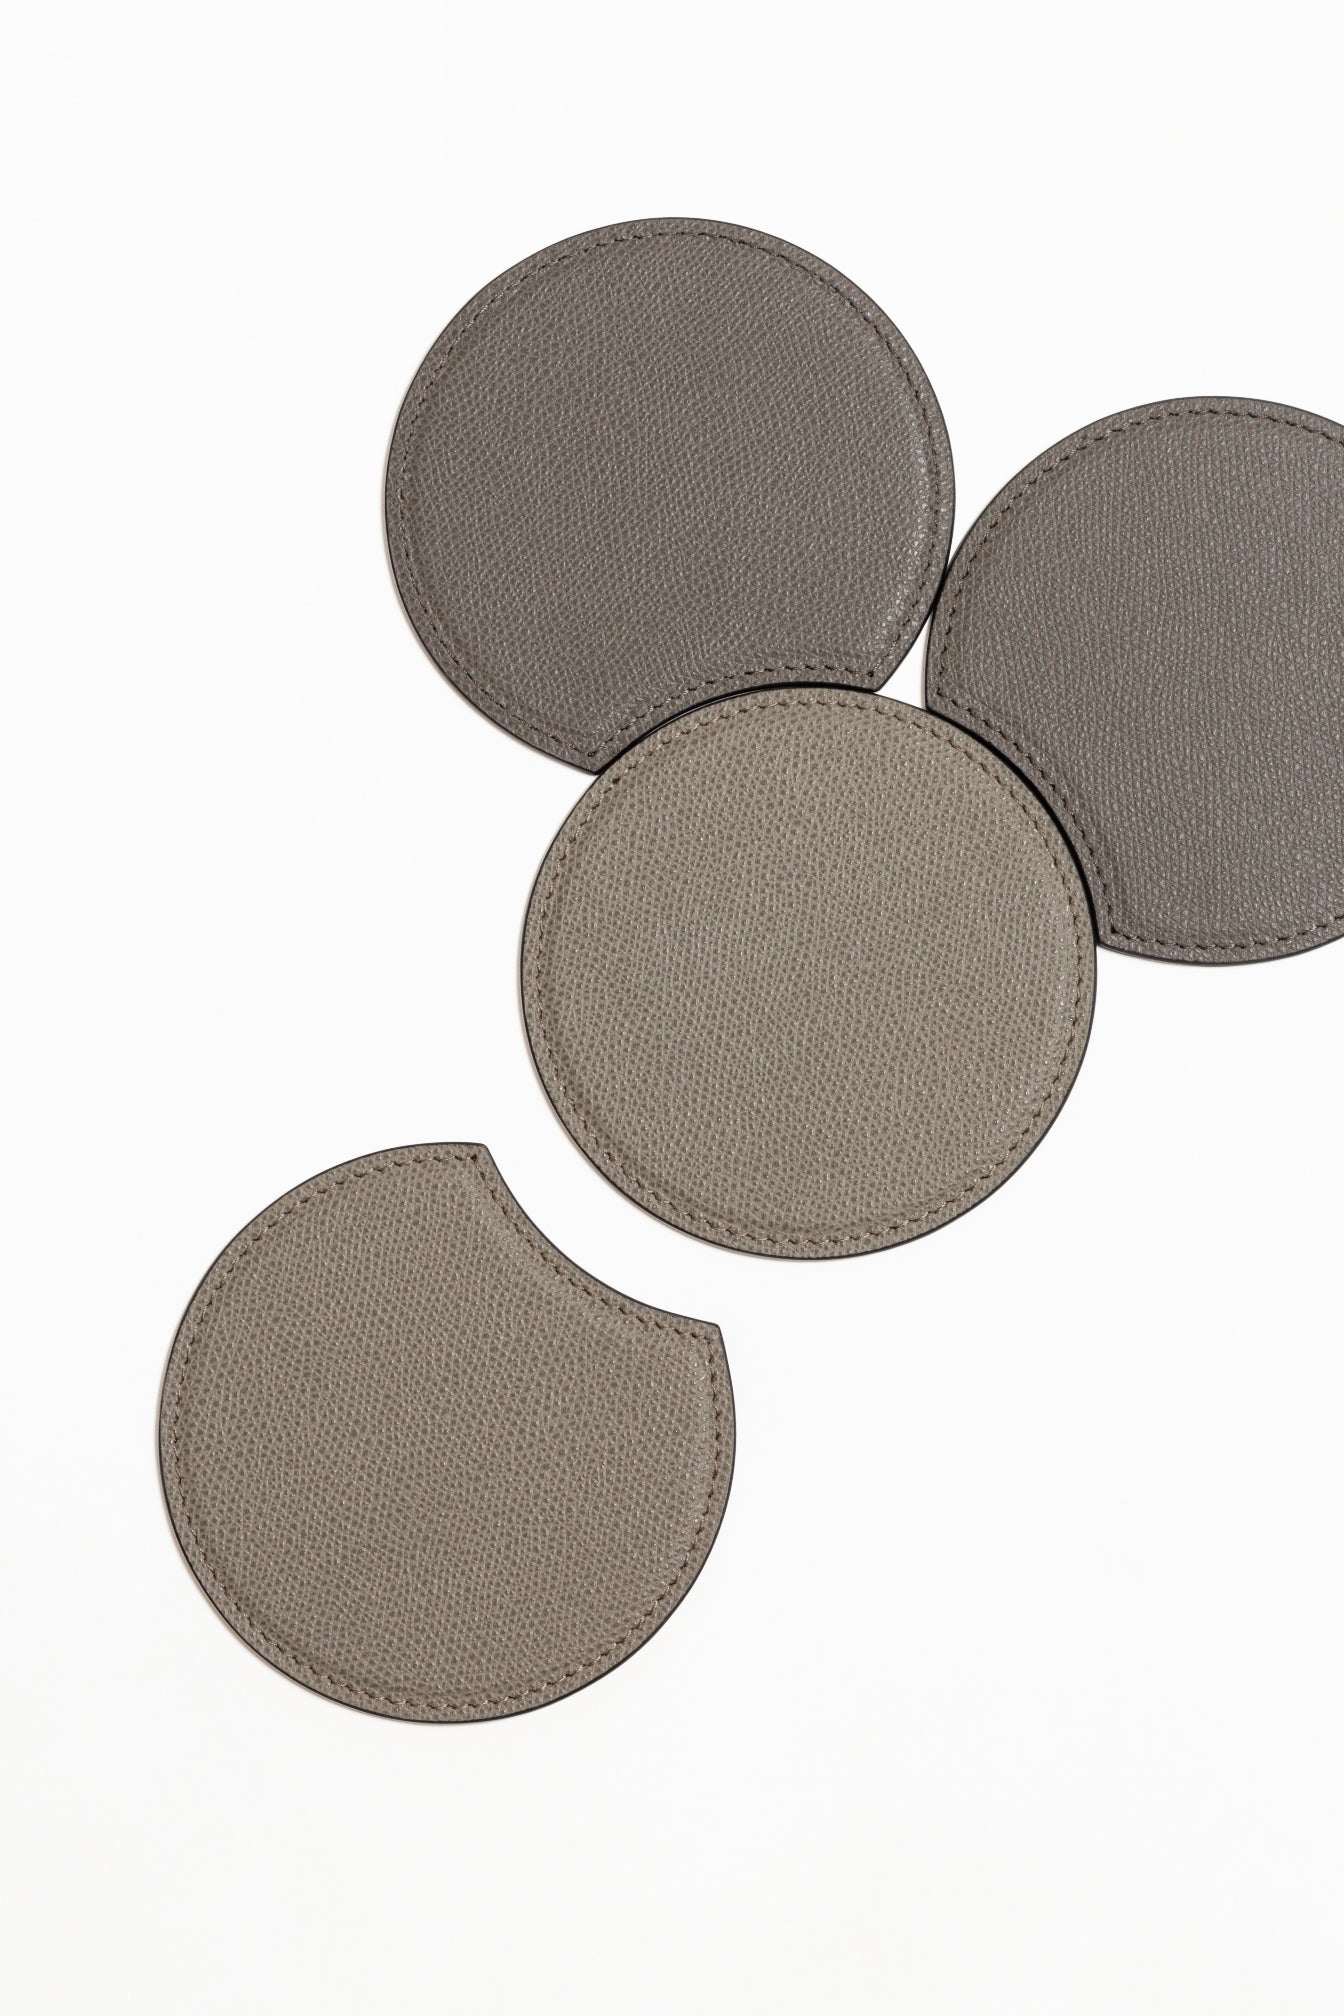 Giobagnara x Piet Boon Form Coasters | Double-Face Leather-Covered Rigid Metal Structure | Stylish and Functional Coasters | Explore a Range of Luxury Home Decor at 2Jour Concierge, #1 luxury high-end gift & lifestyle shop